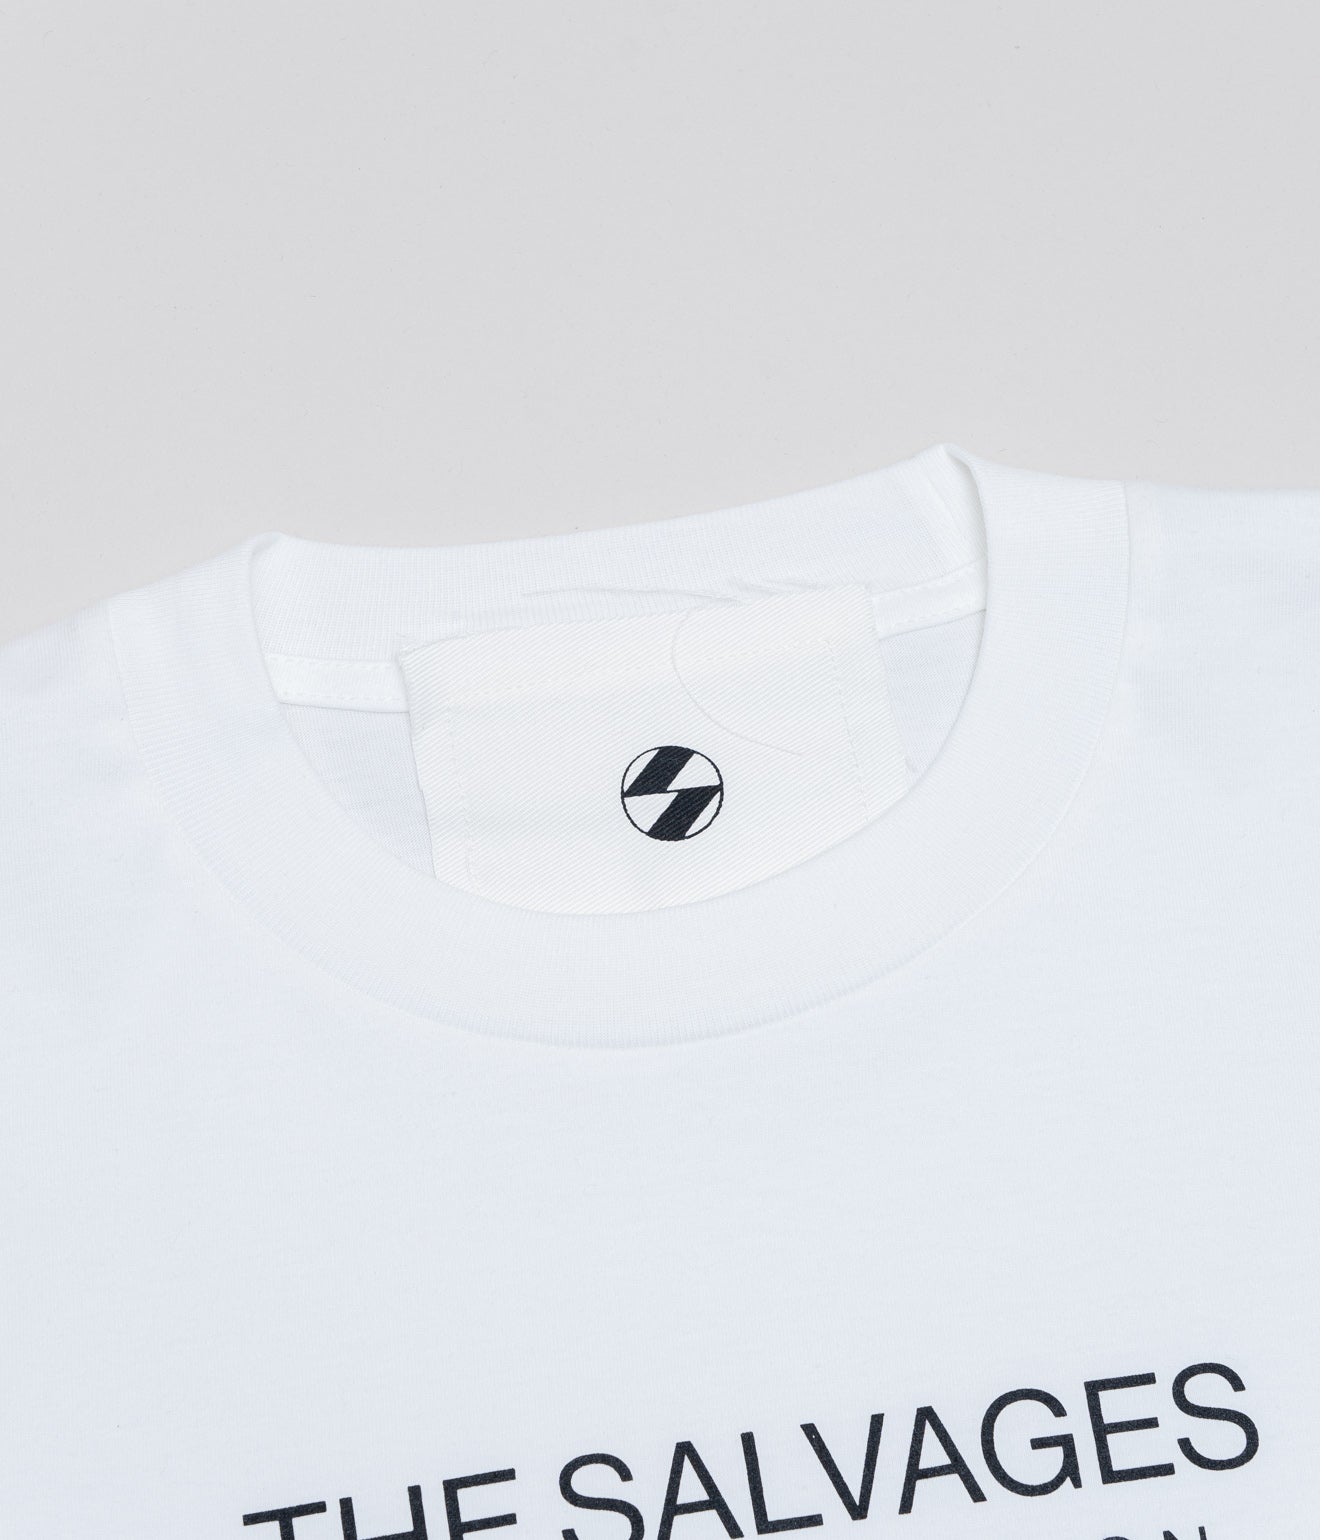 THE SALVAGES "FORM & FUNCTION D-RING OS T-SHIRT" WHITE - WEAREALLANIMALS